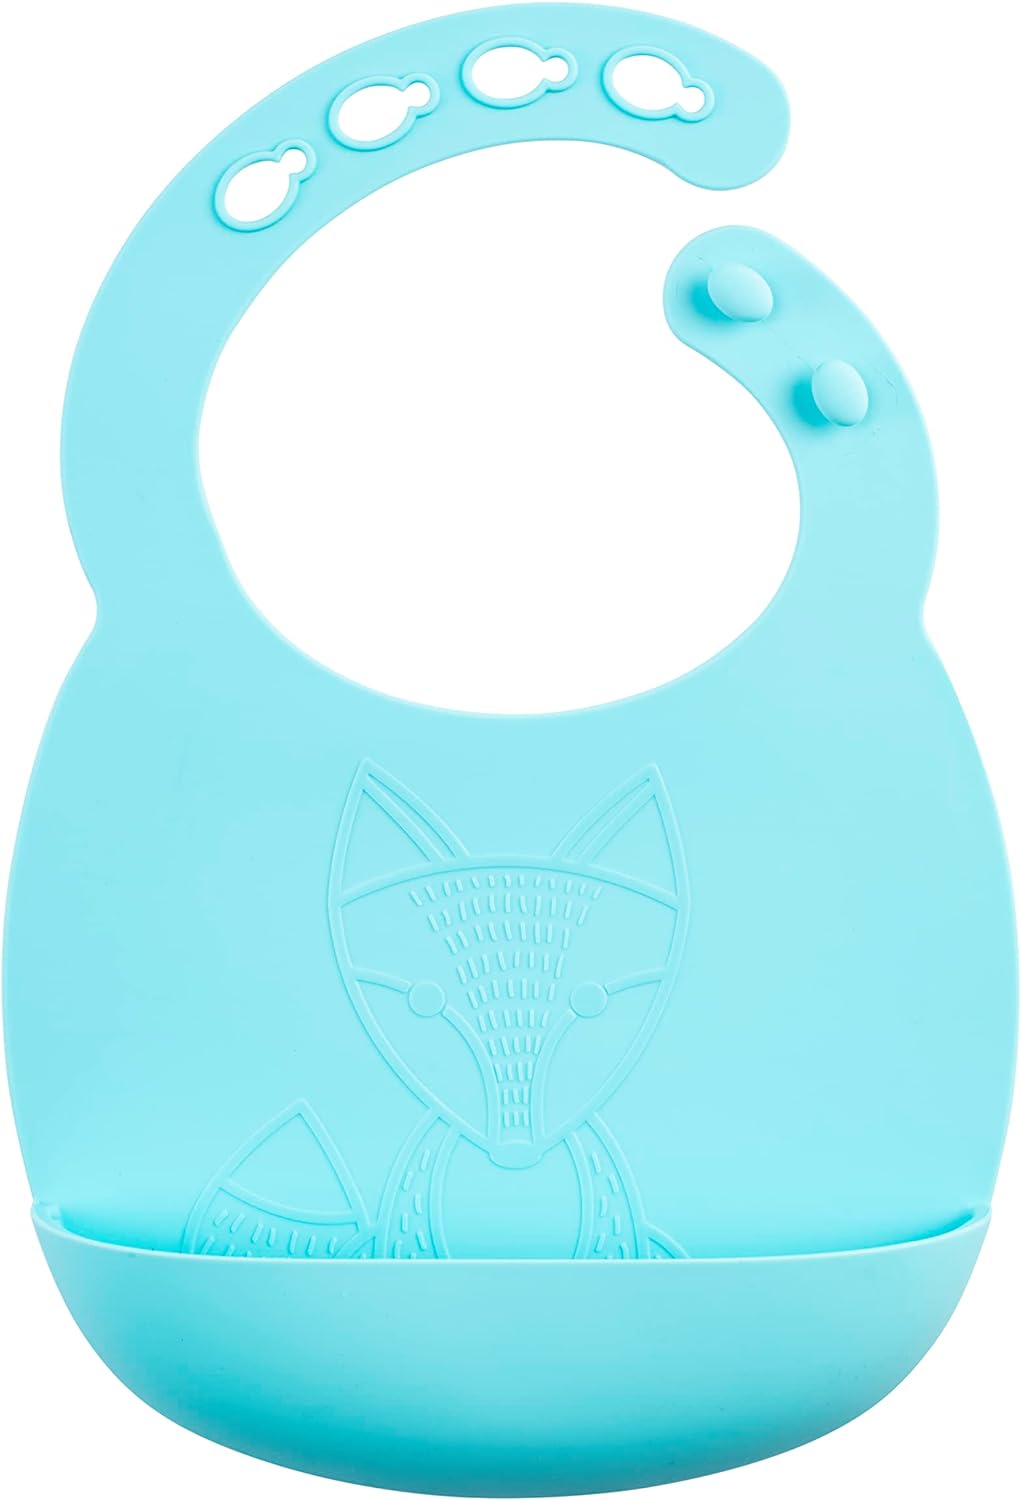 Dr. Brown's Silicone Bib - Turquoise